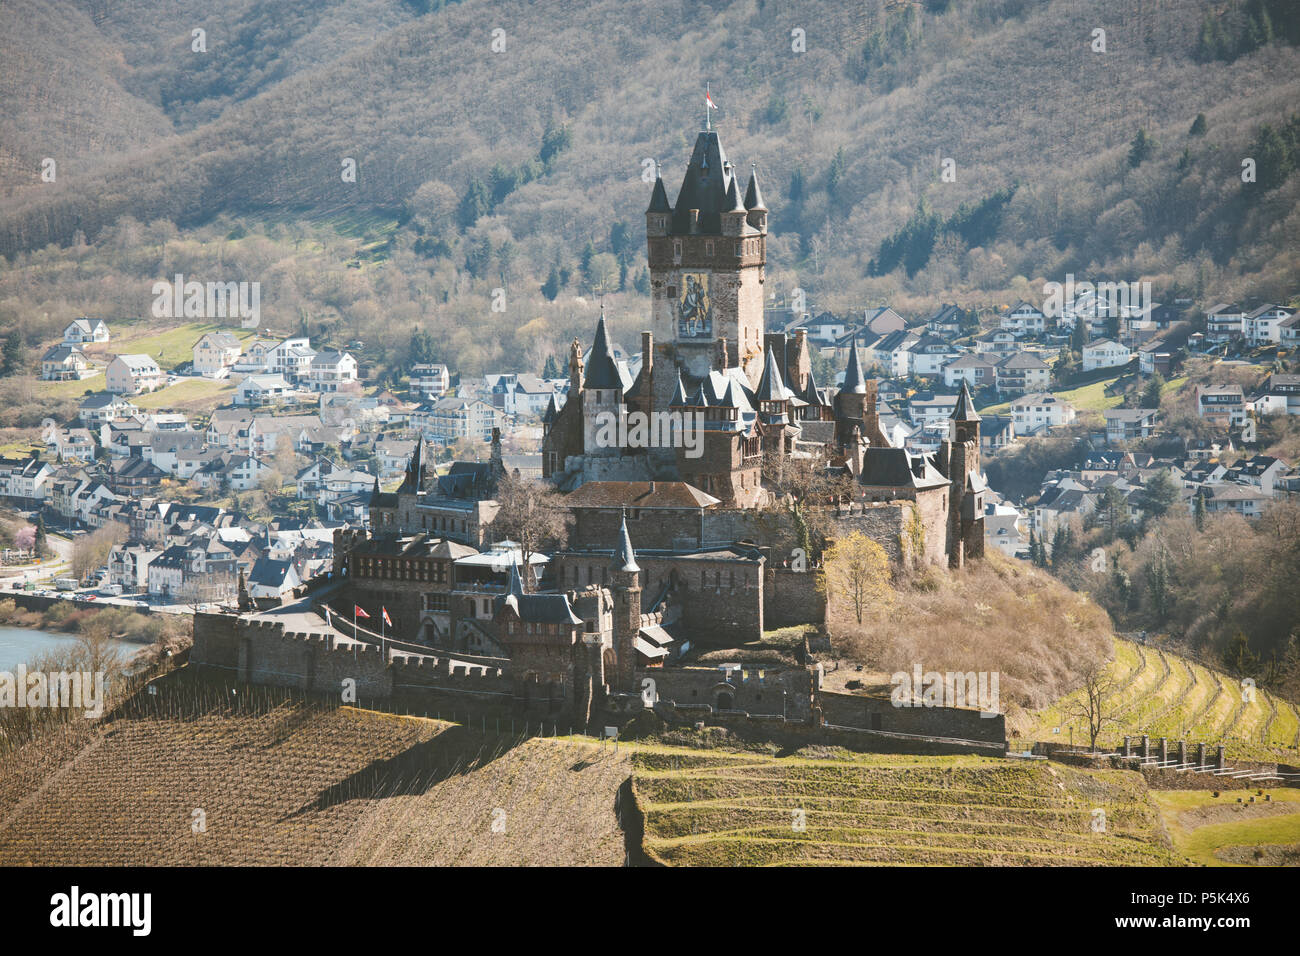 Historic town of Cochem with famous Reichsburg castle on top of a hill and scenic Moselle river on a sunny day, Rheinland-Pfalz, Germany Stock Photo